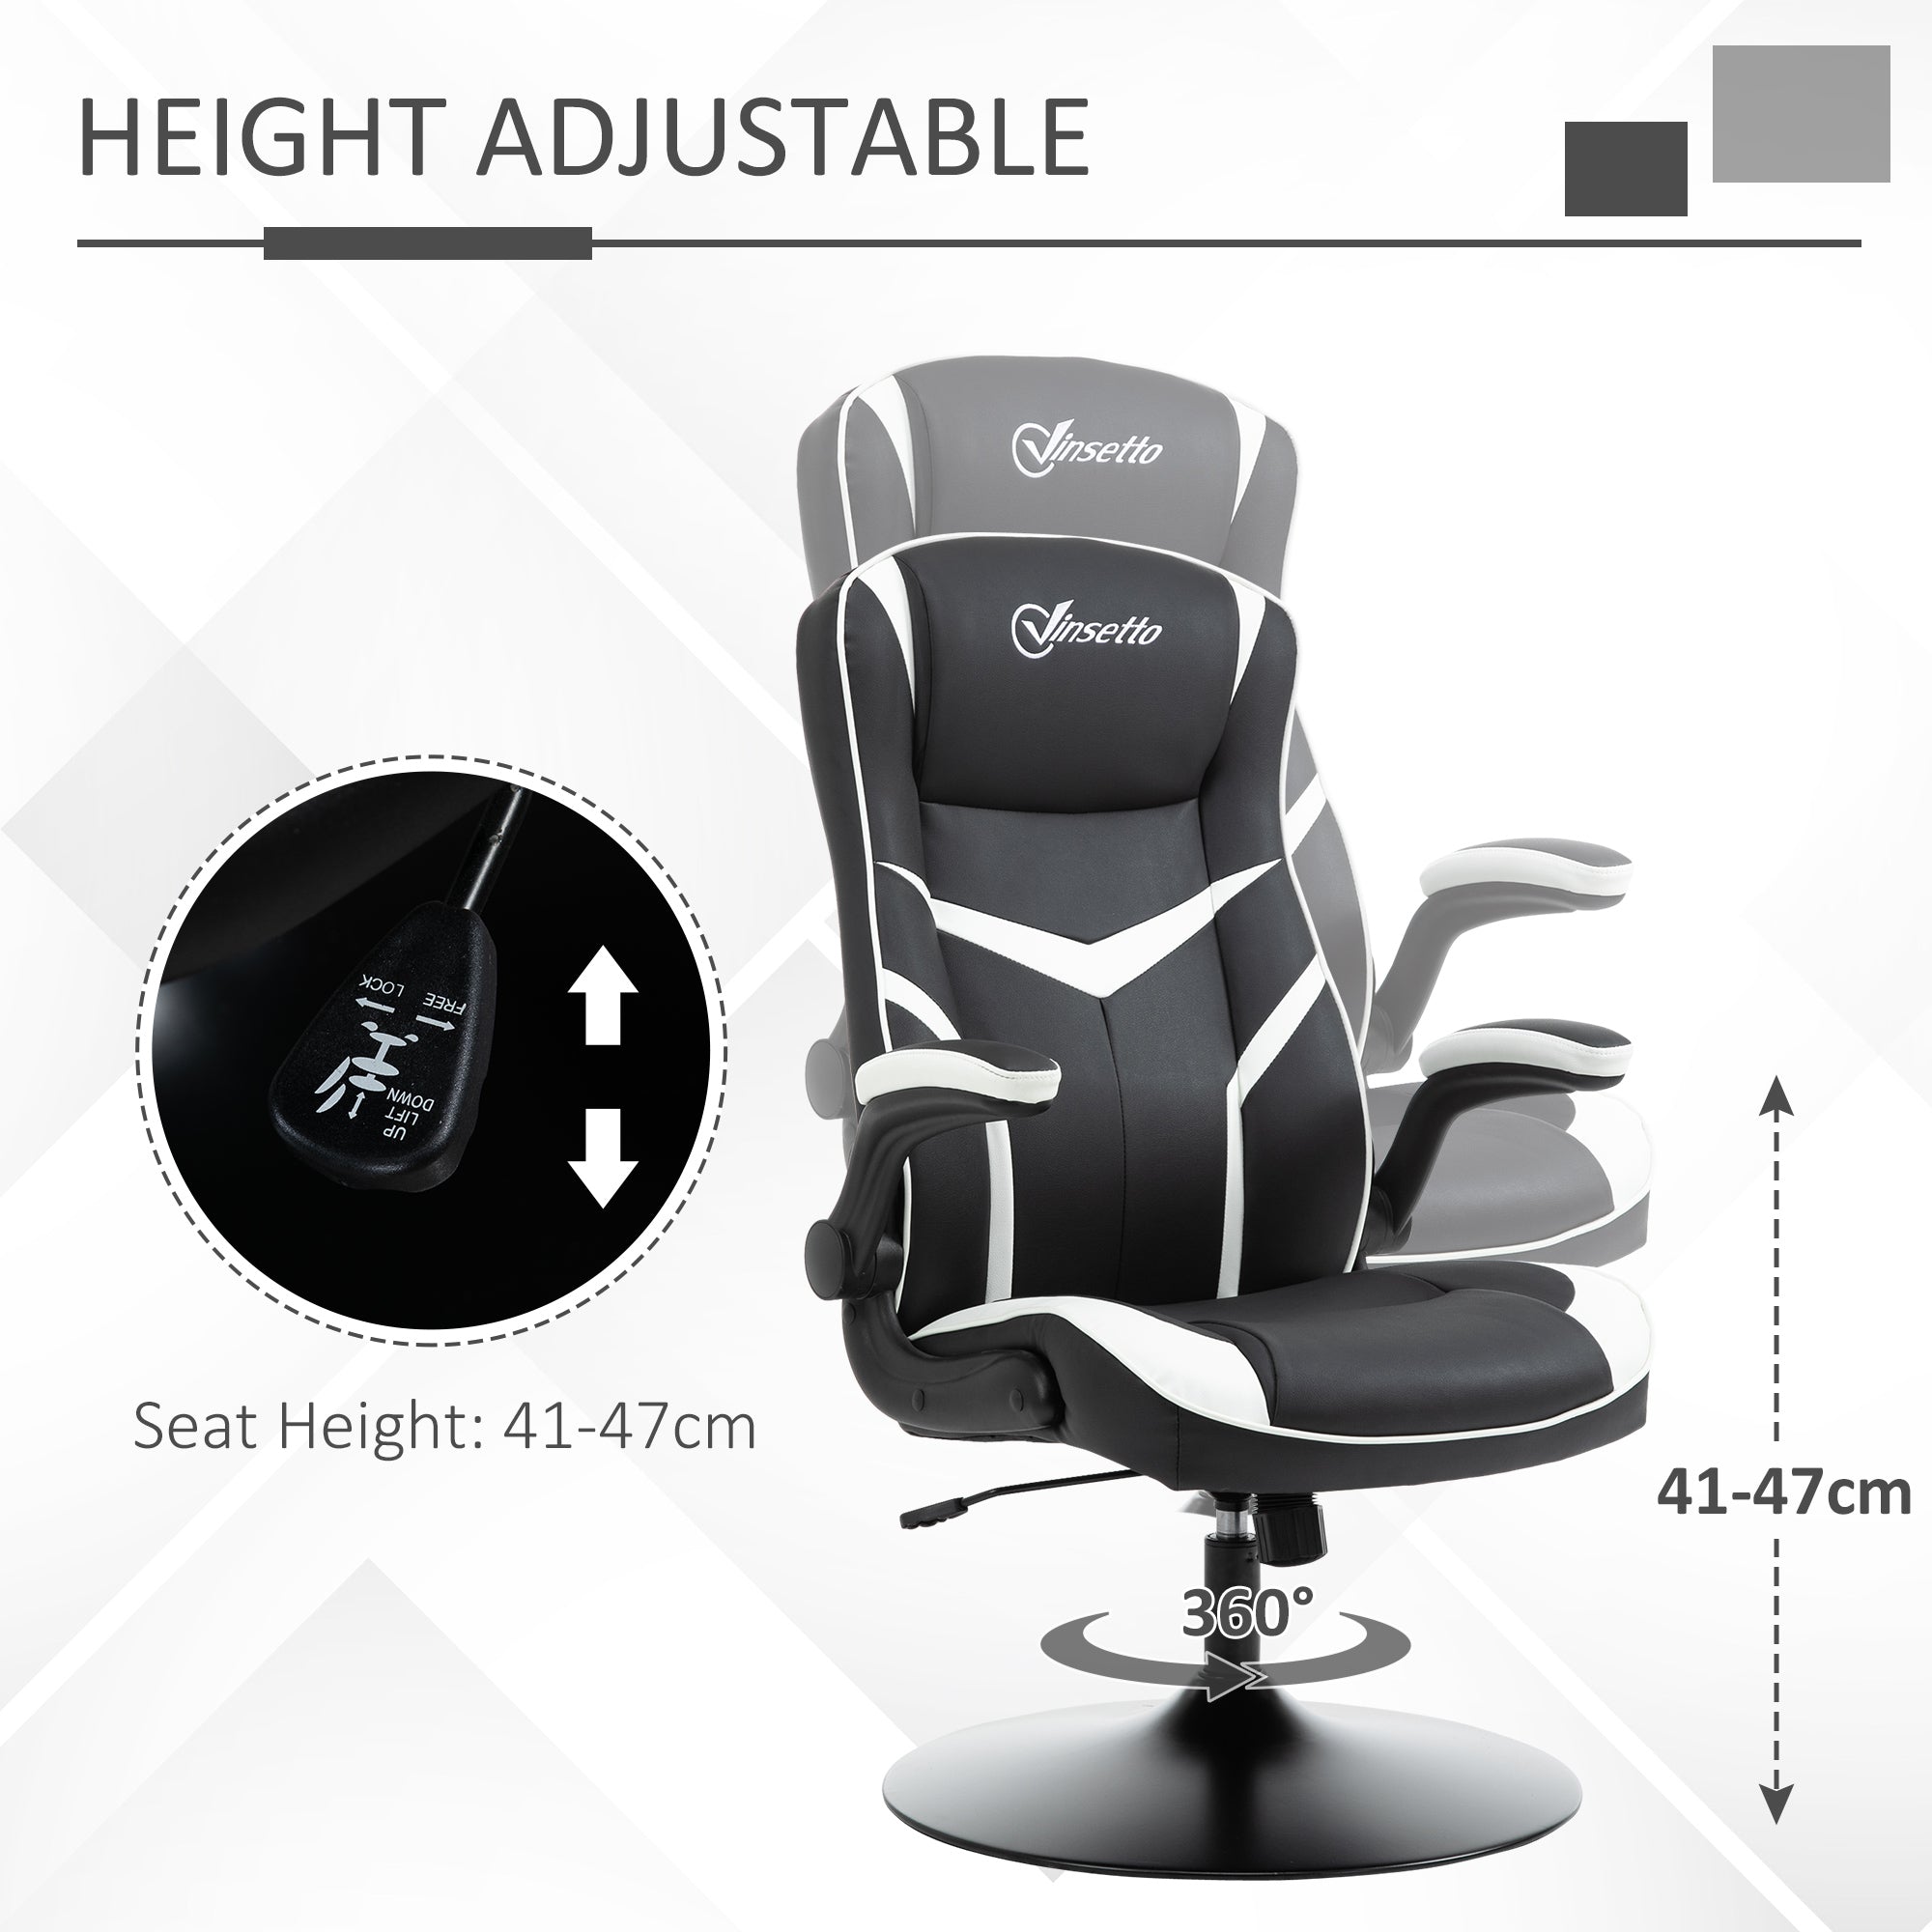 Gaming Chair Ergonomic Computer Chair Home Office Desk Swivel Chair w/ Adjustable Height Pedestal Base PVC Leather, Black & White-3